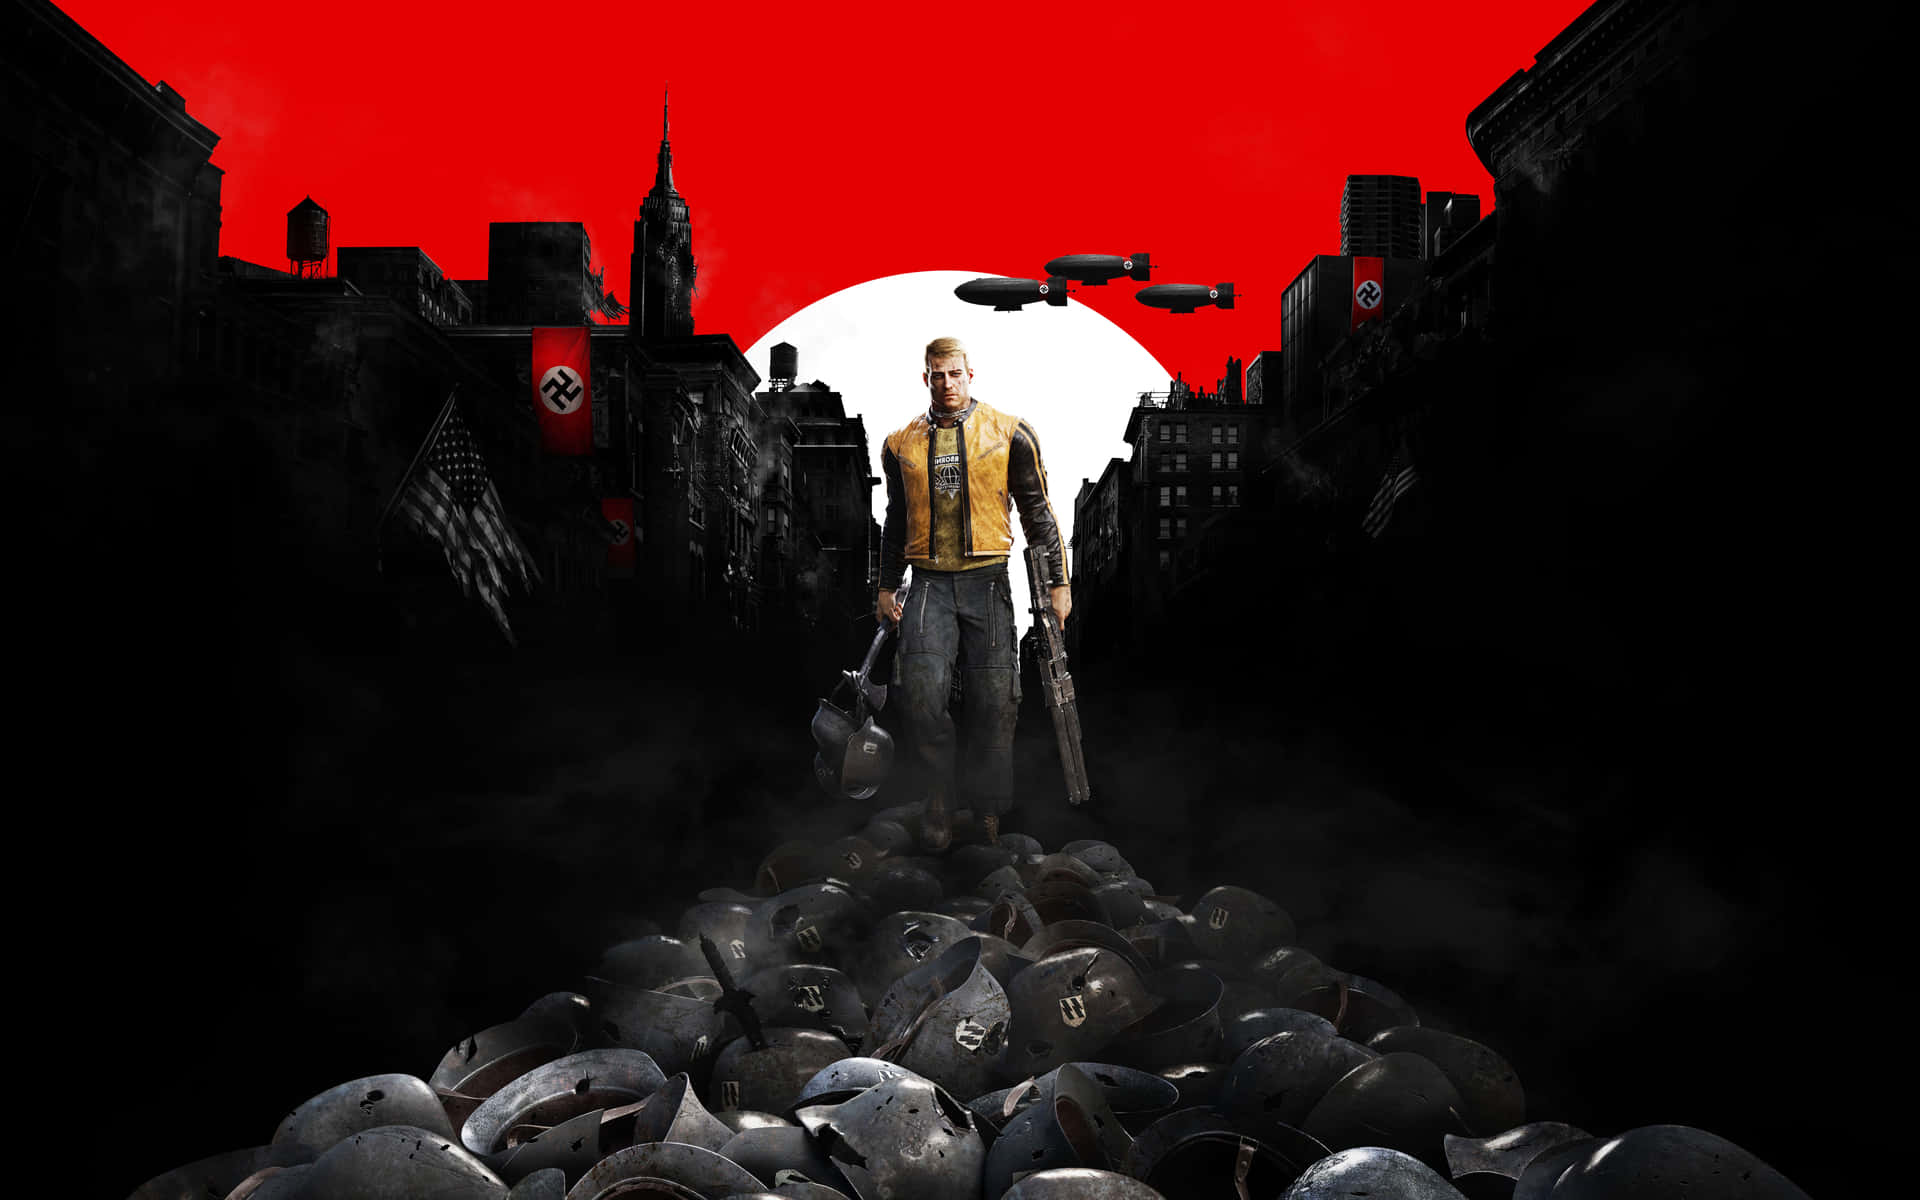 Experience intense combat and exploration in all-new Nazi environments, with customisable weapons and massive enemy forces on a mission to thwart evil plans.